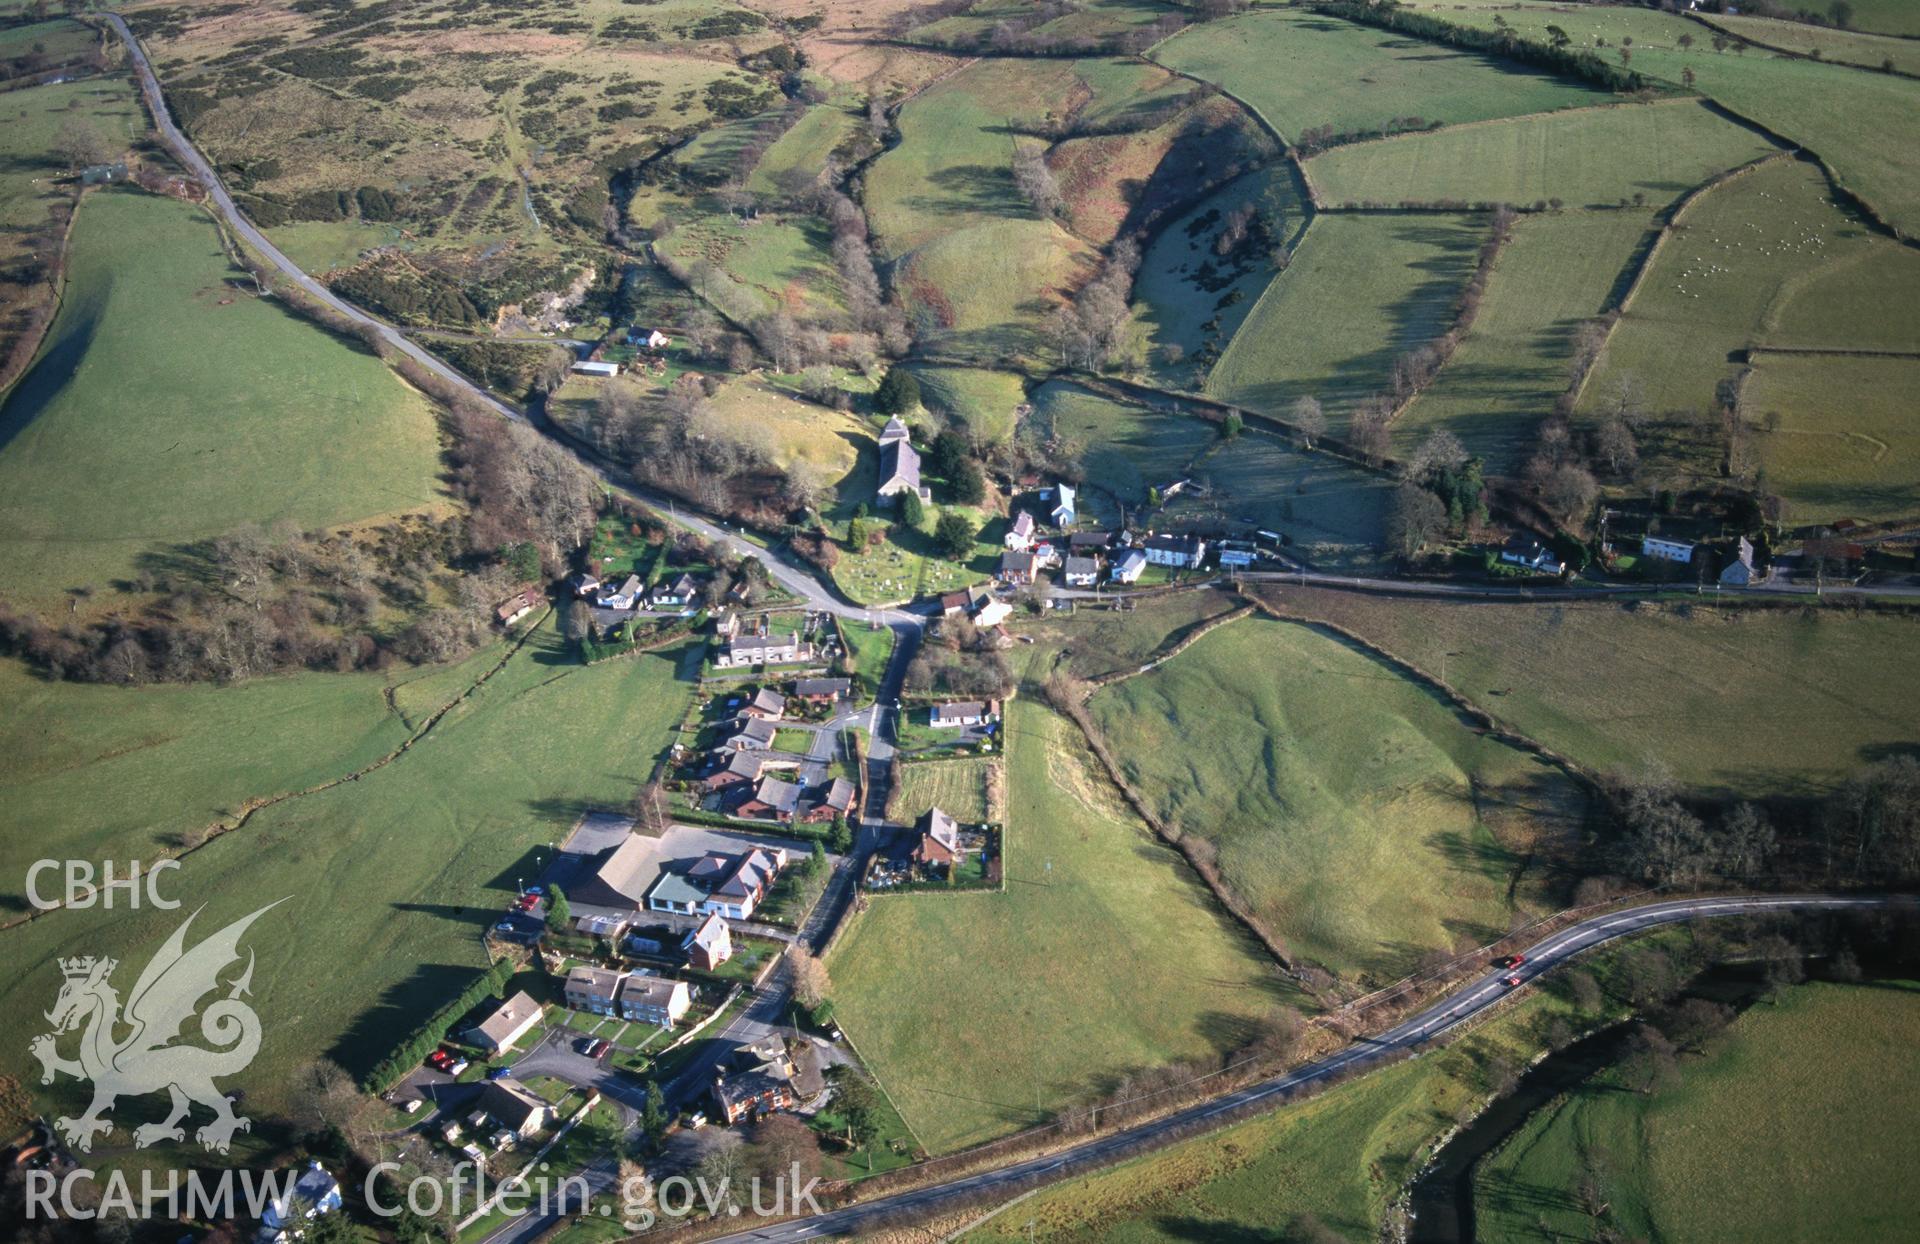 Slide of RCAHMW colour oblique aerial photograph of Llanbister, taken by T.G. Driver, 9/2/2001.